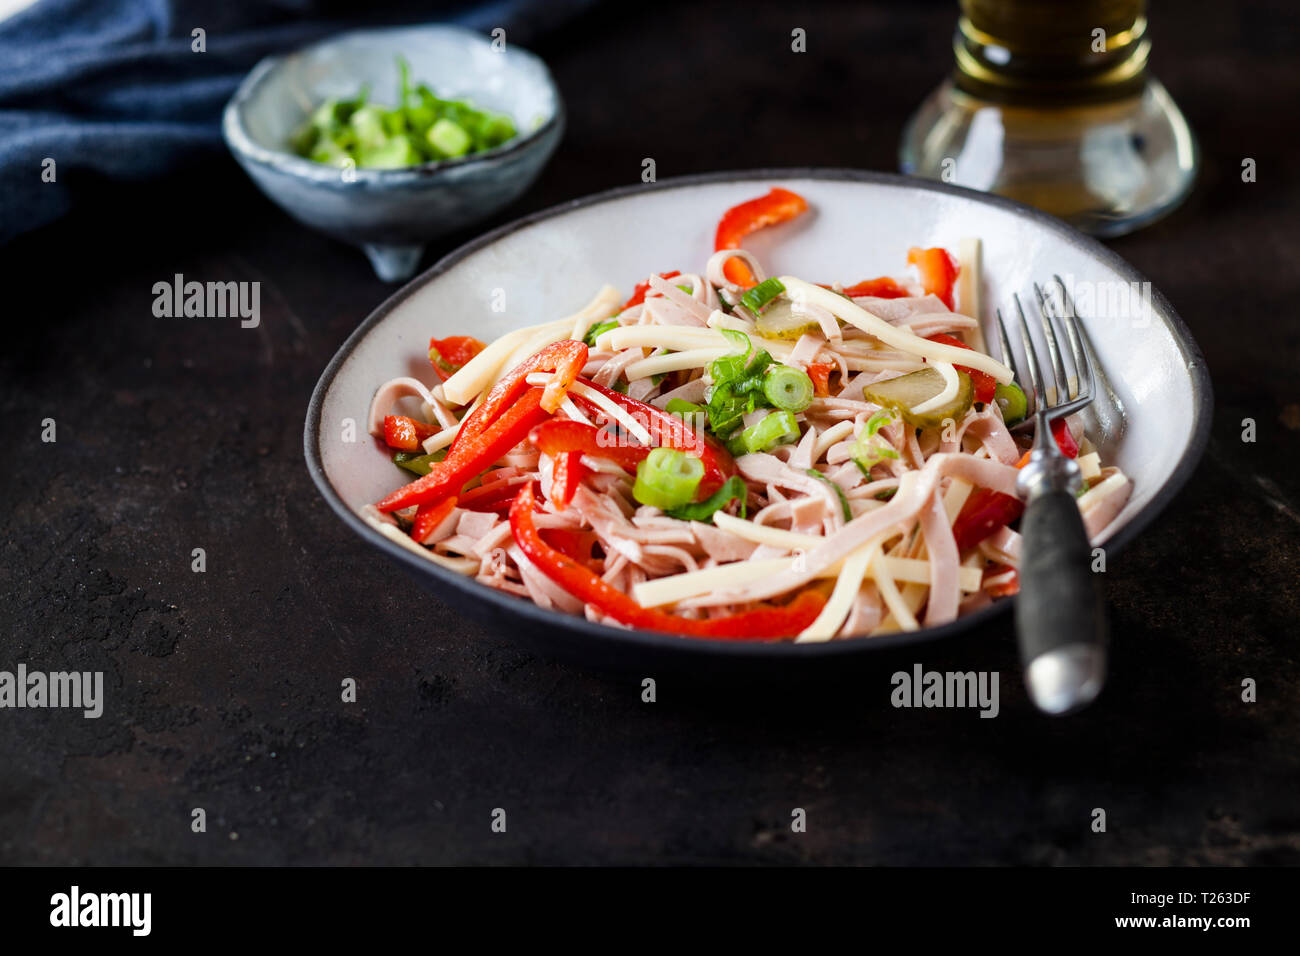 Sausage salad with cheese, red bell pepper, spring onions and gherkins Stock Photo